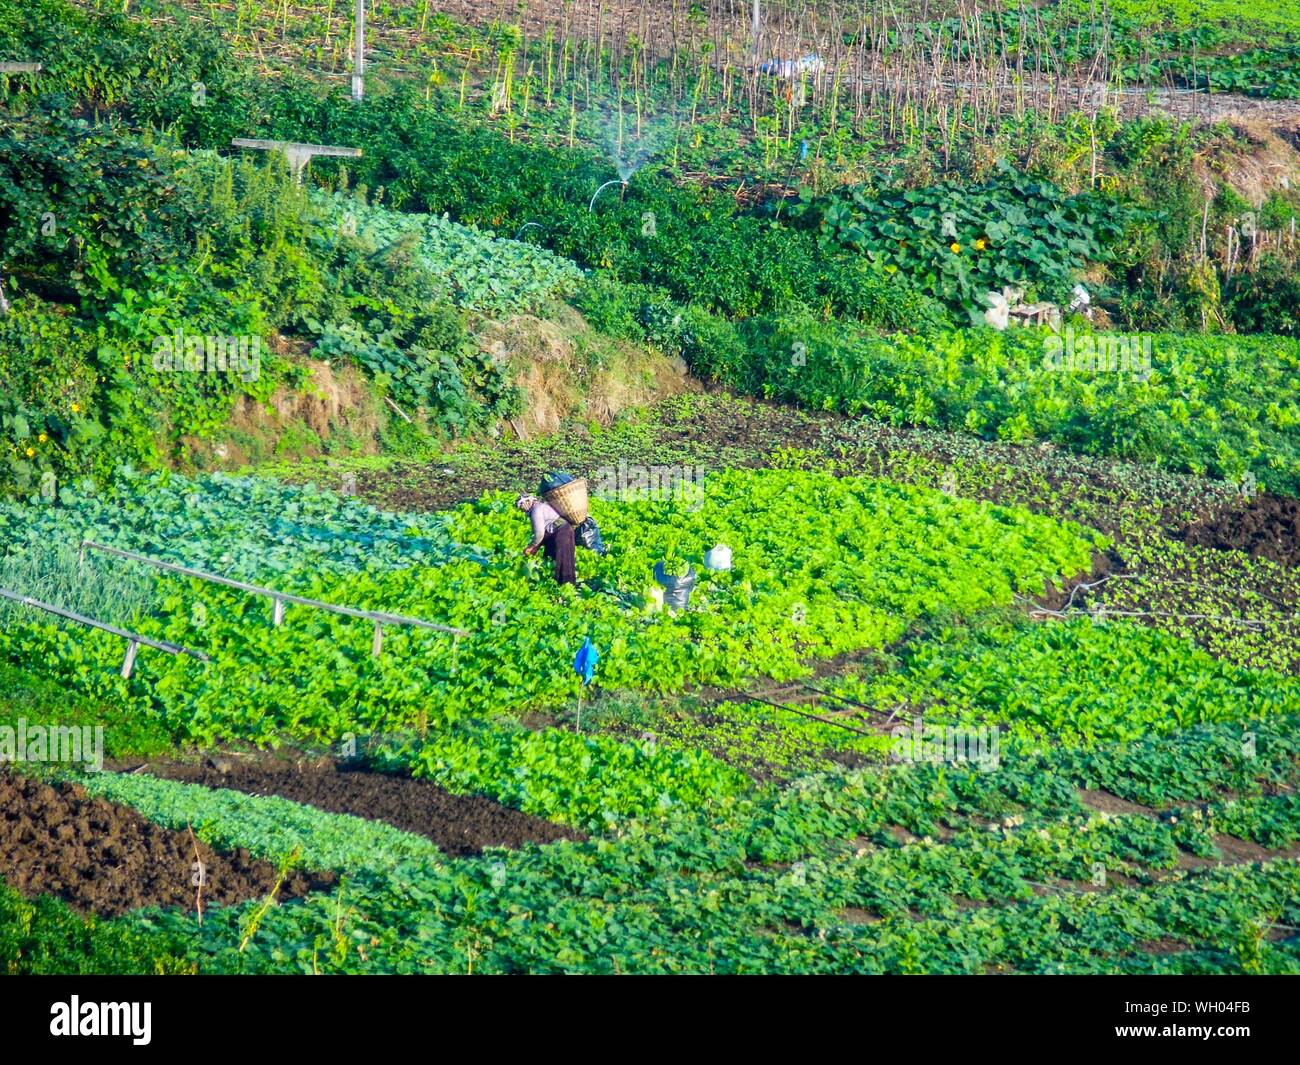 High Angle View Of Farmer Harvesting Tea Leaves From Field Stock Photo